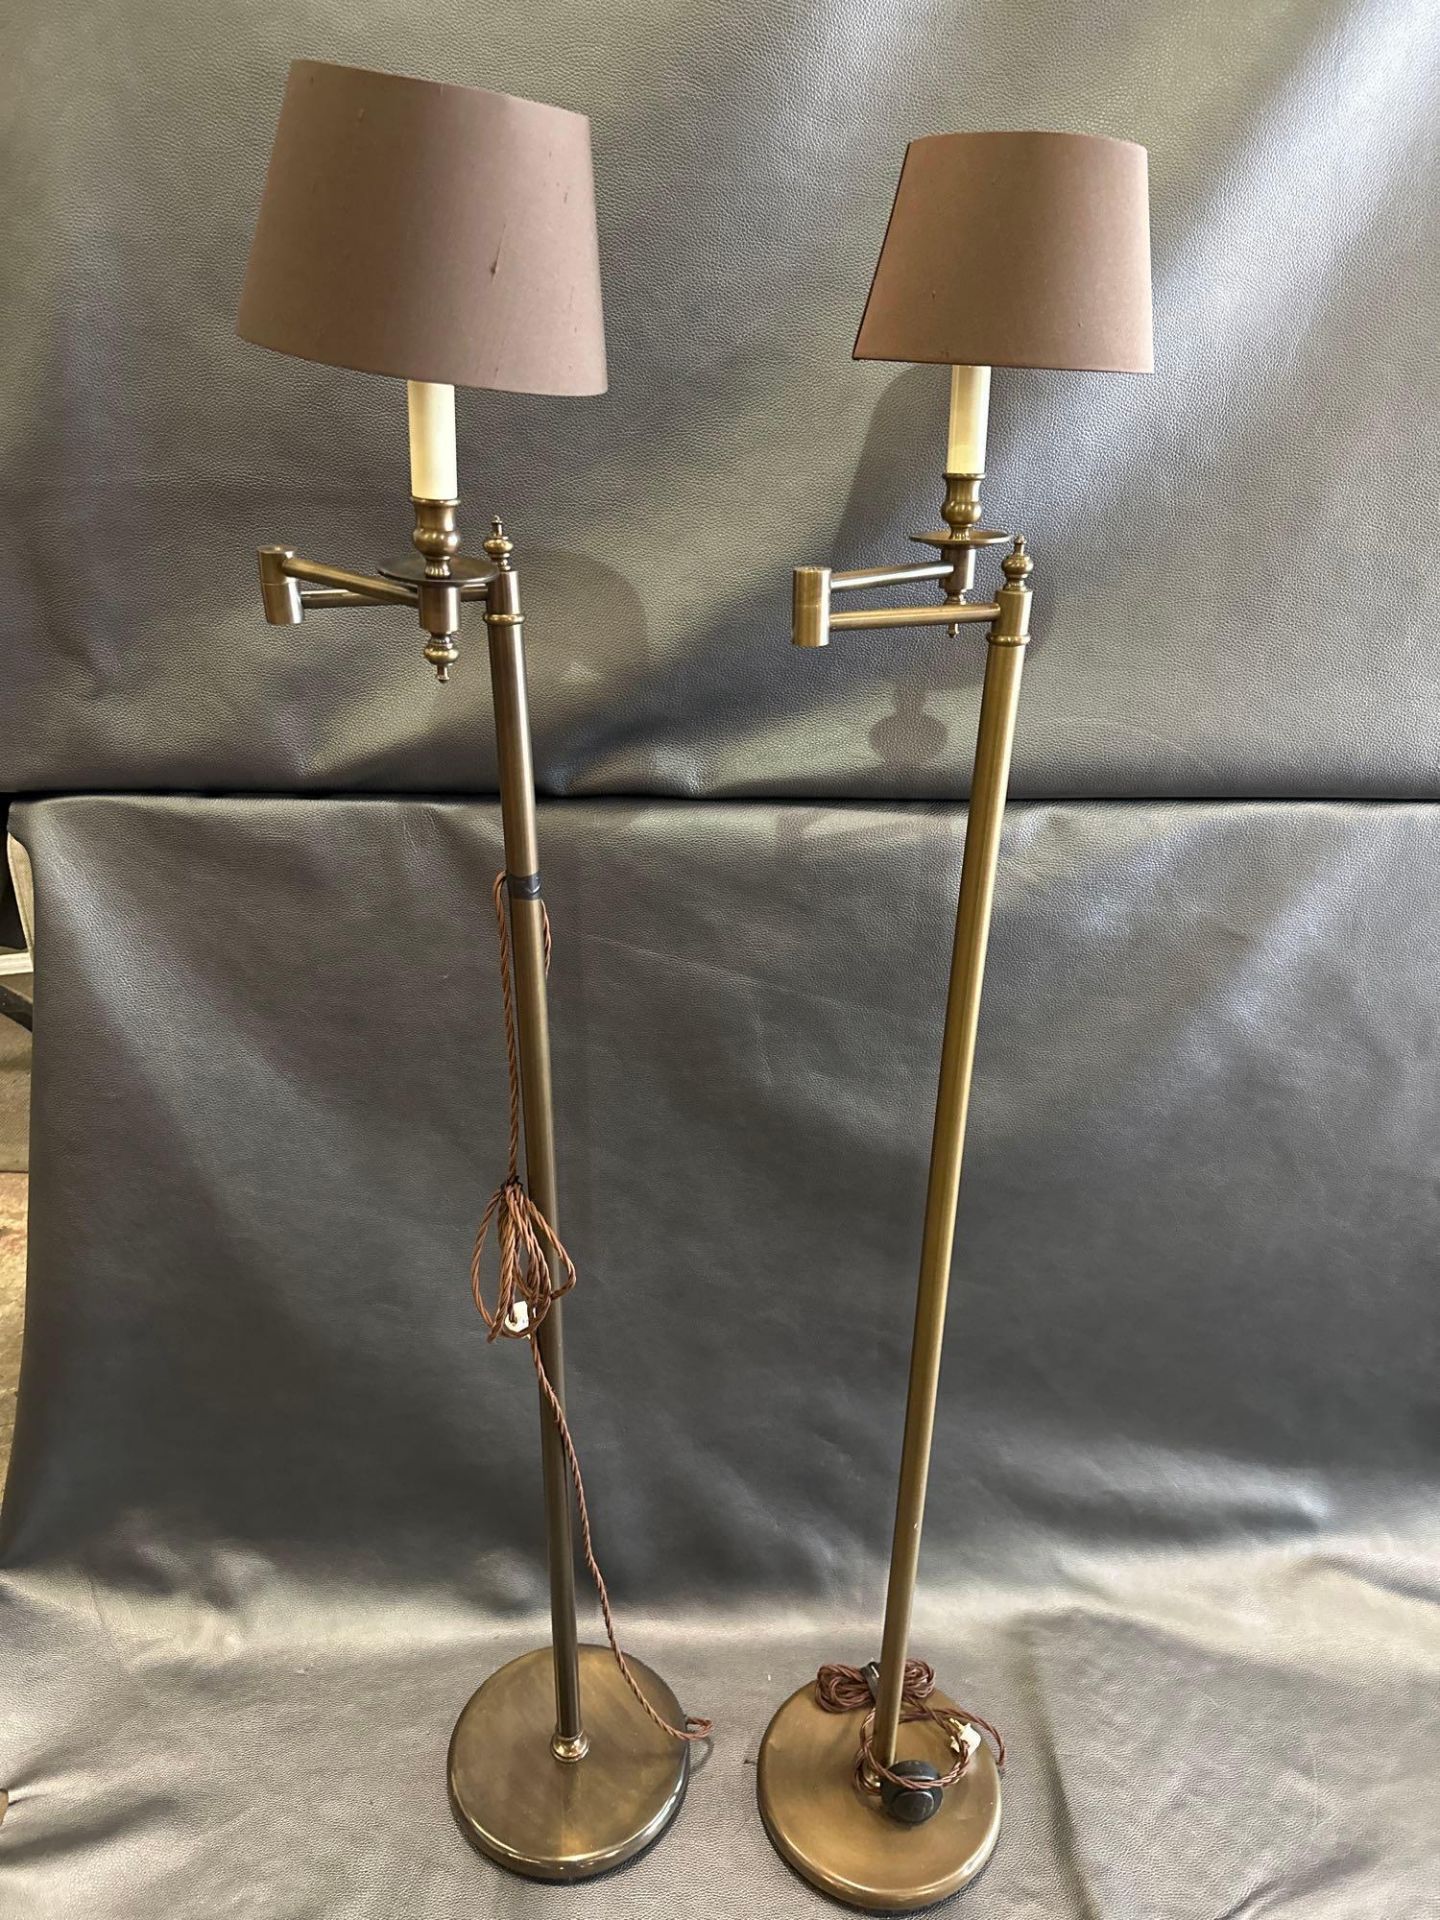 A Pair Library Floor Lamps Finished In English Bronze Swing Arm Function With Shade 156cm - Image 6 of 6